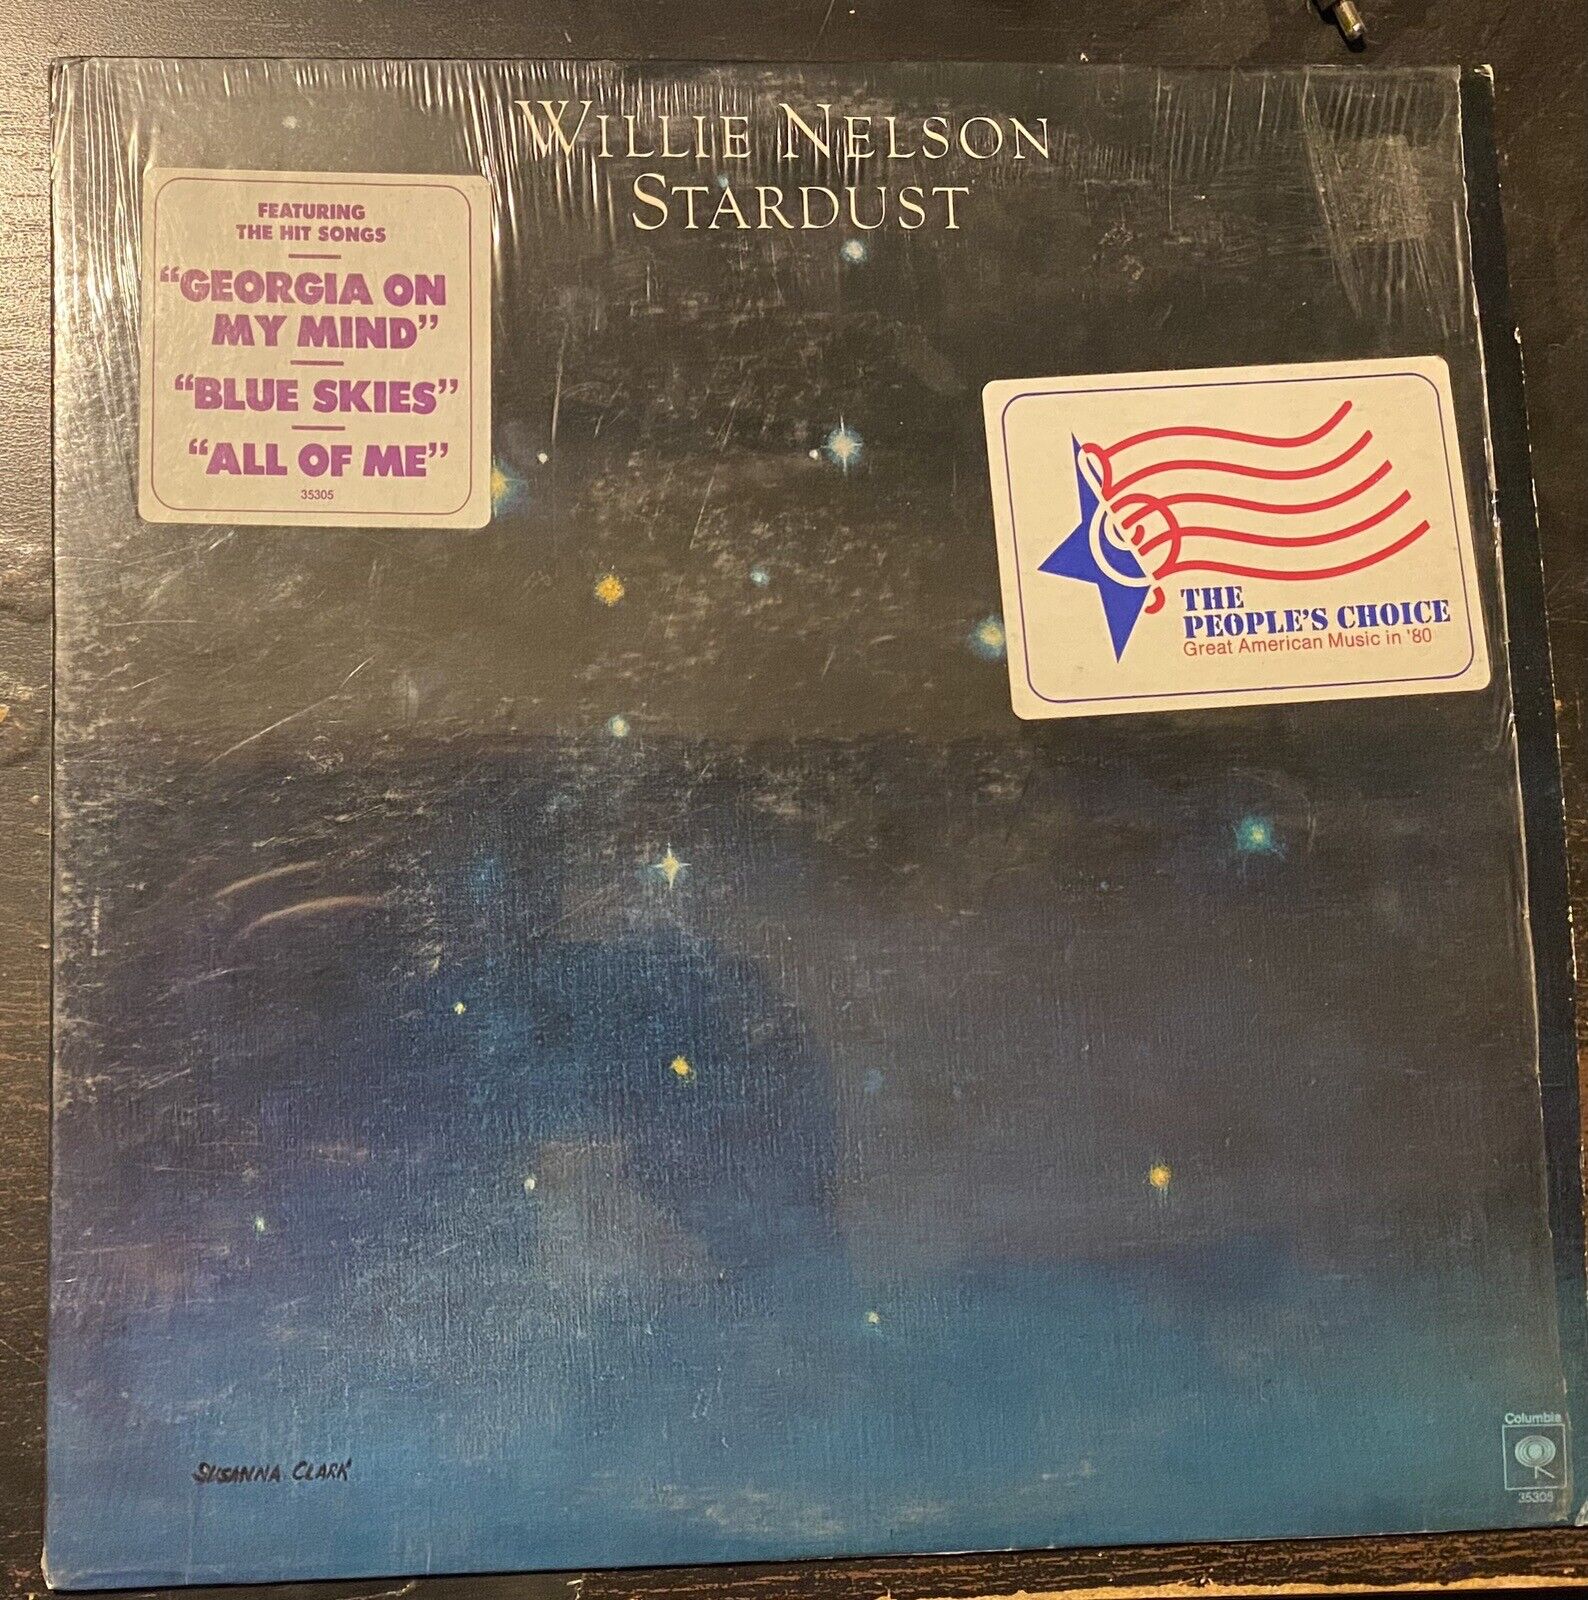 Willie Nelson Vintage Vinyls “The Troublemaker” and “Stardust” Good Condition